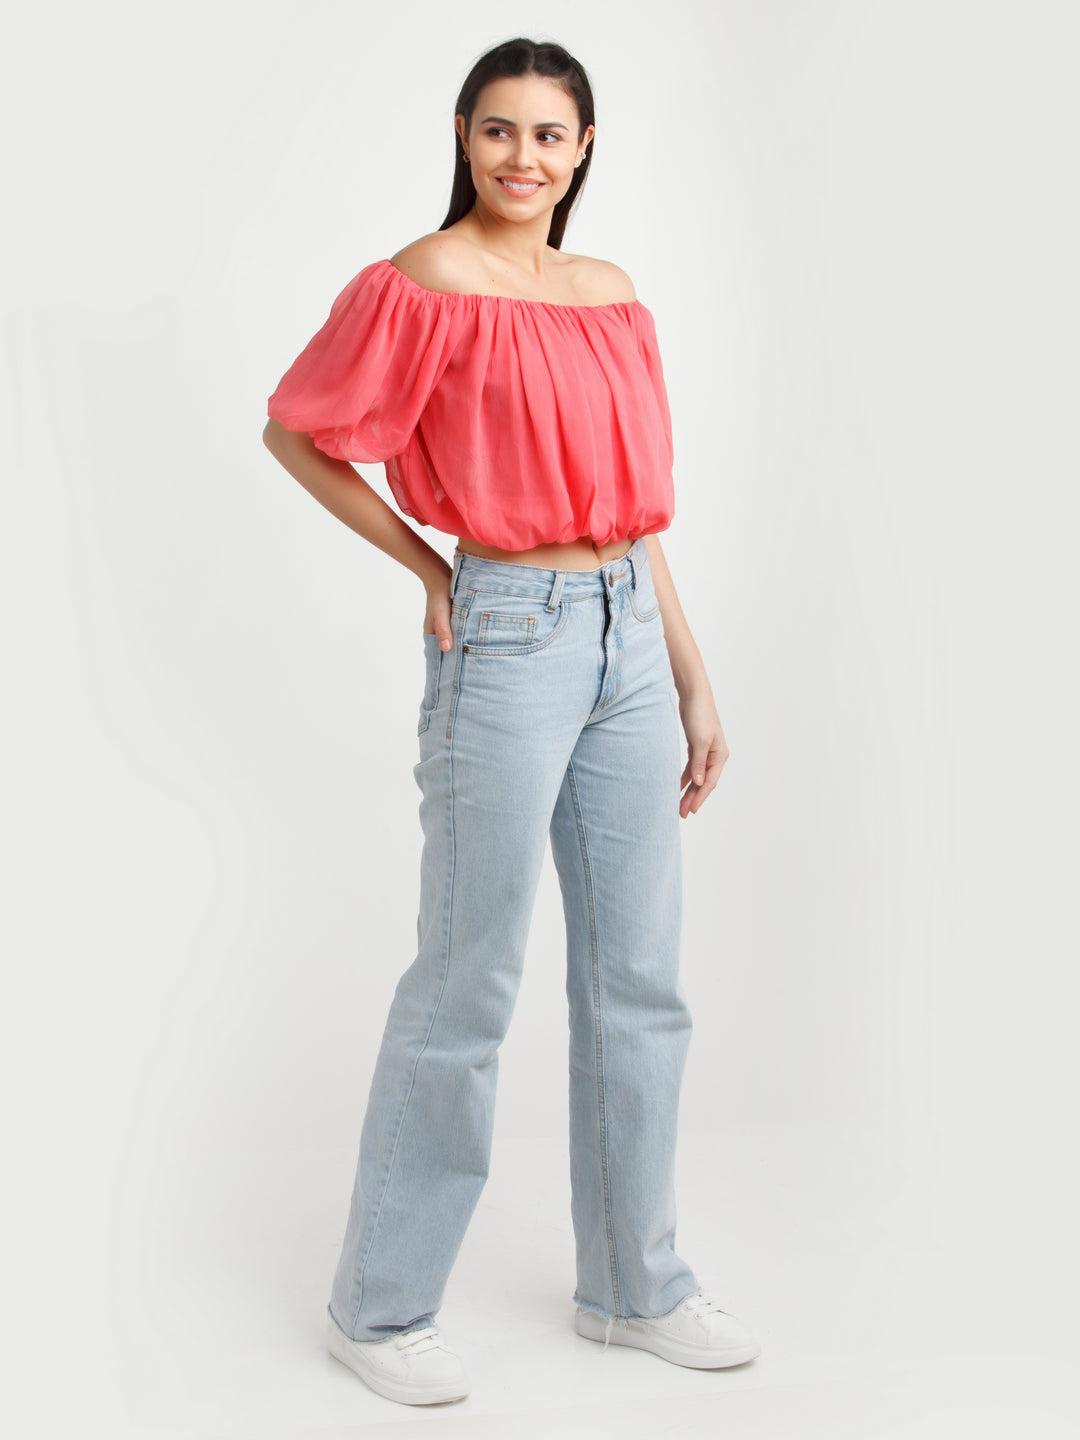 coral-solid-top-for-women